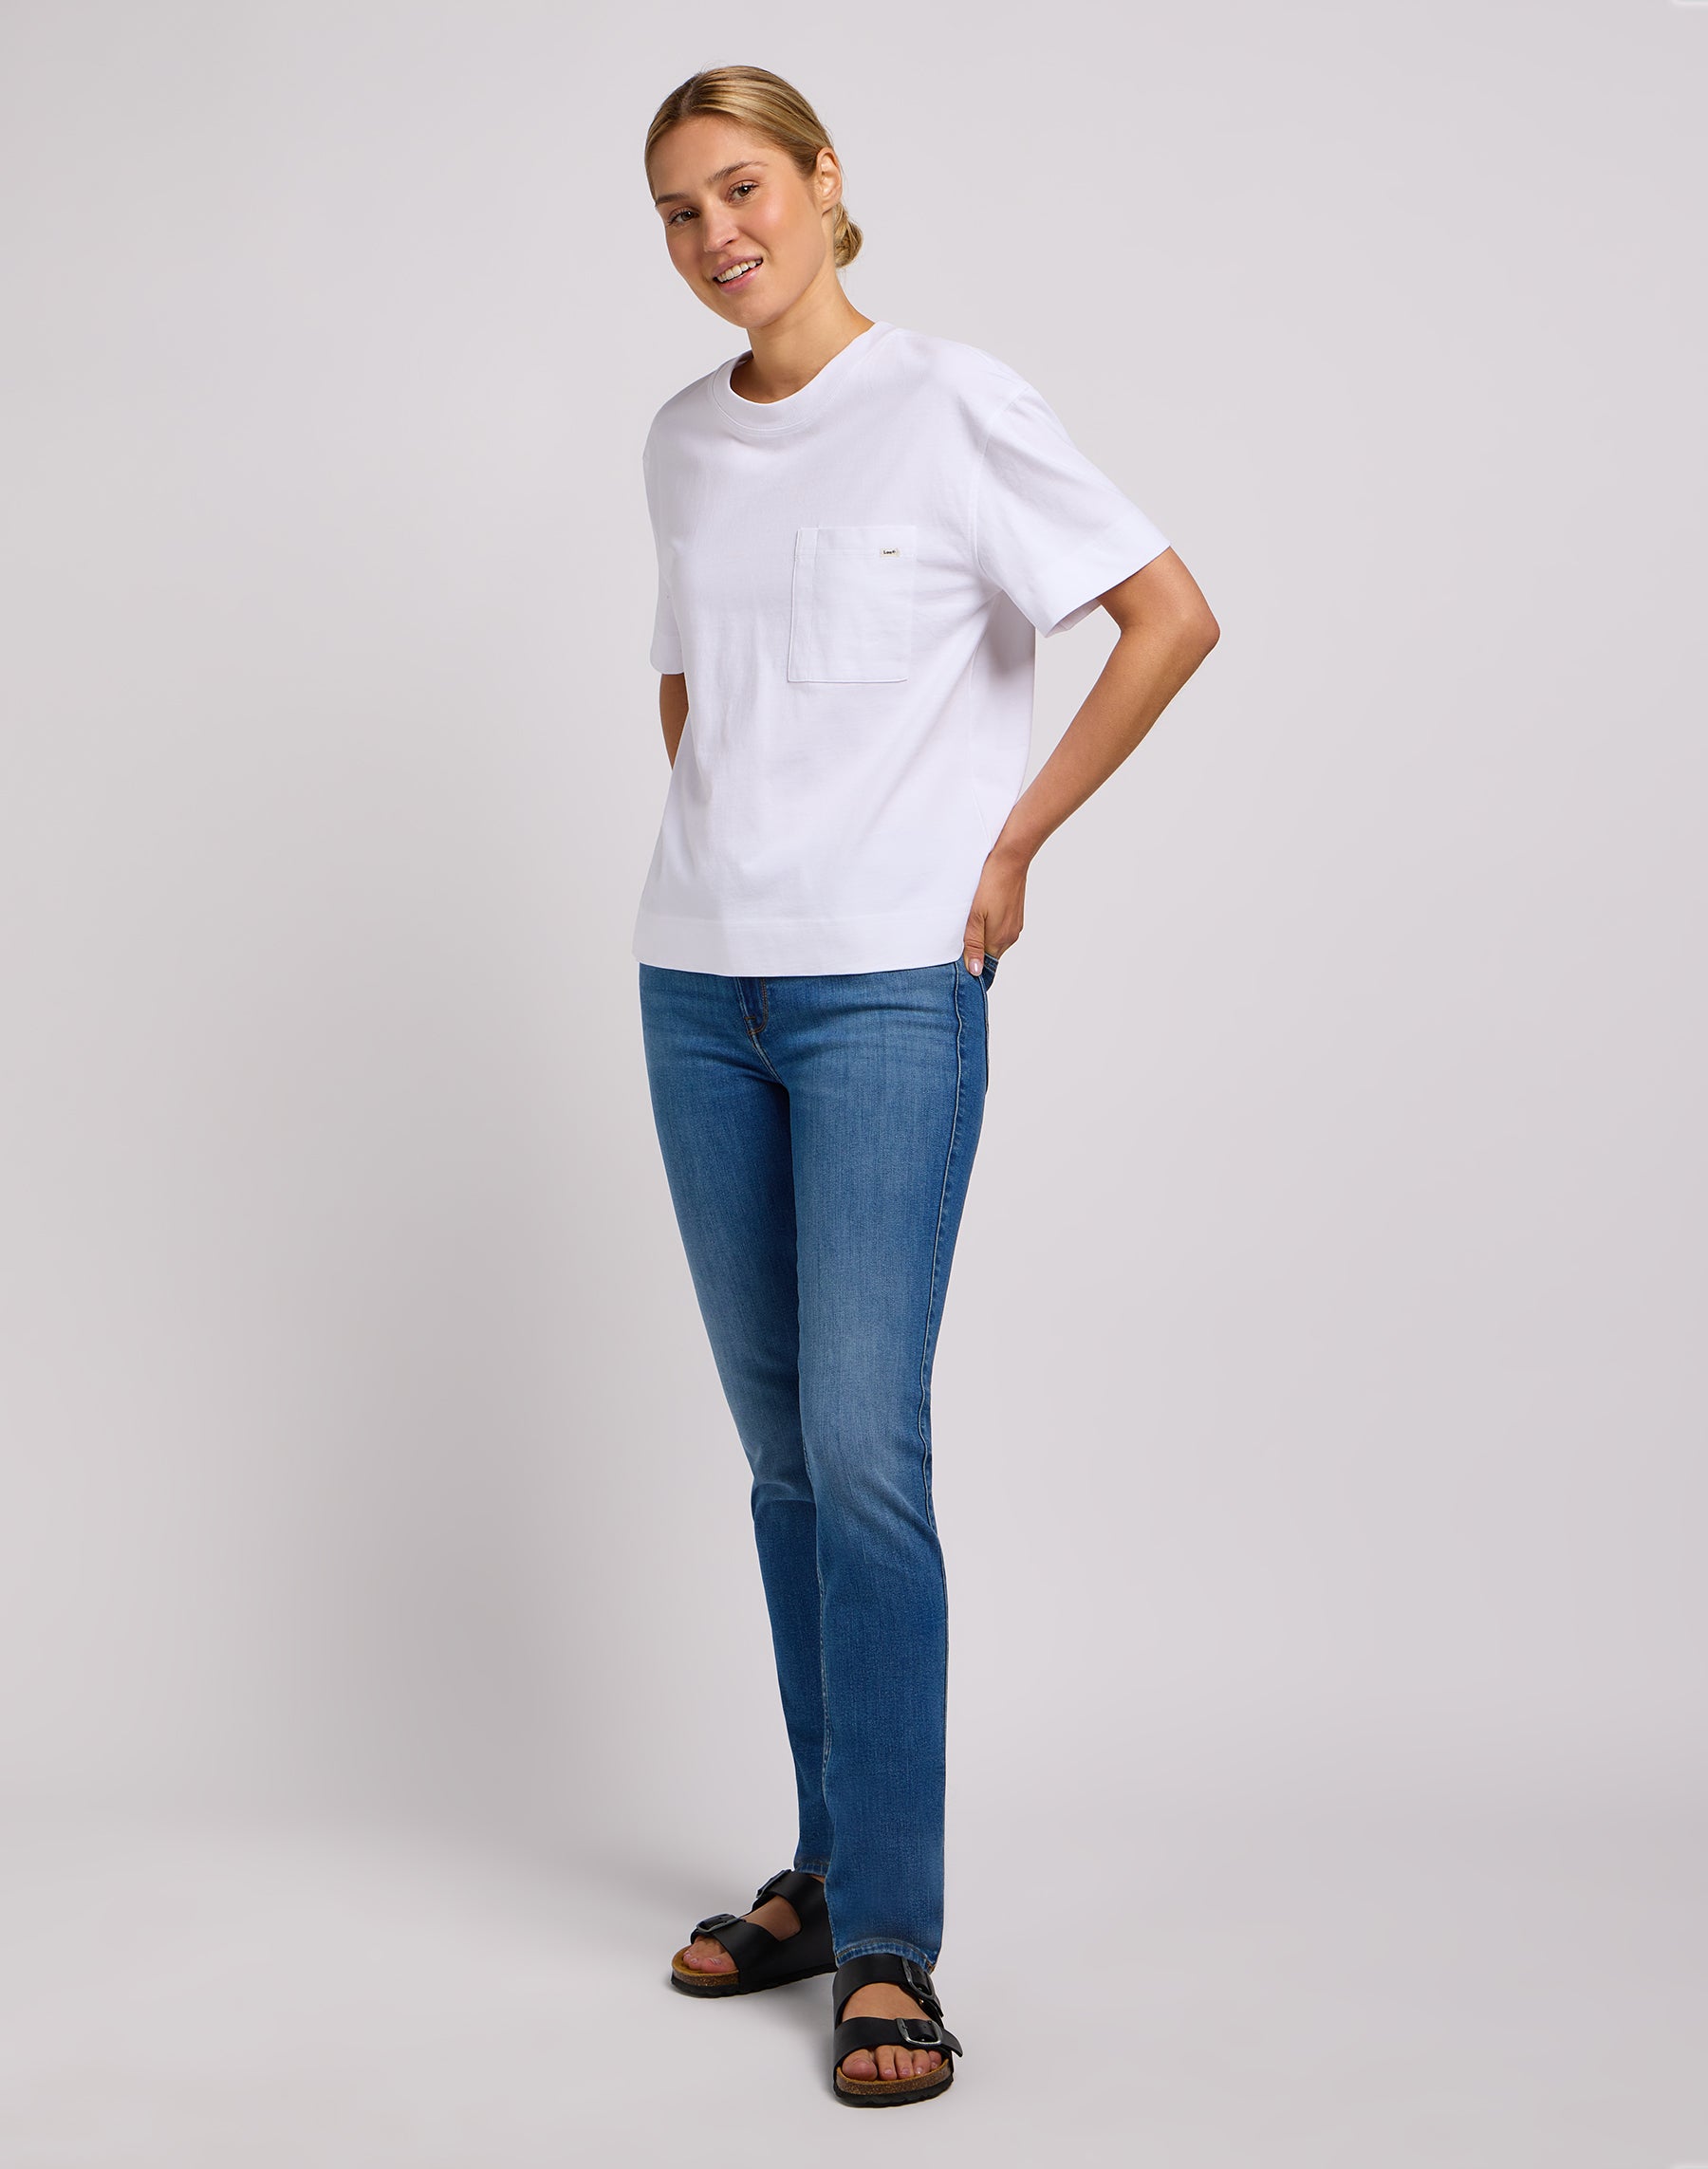 Pocket Tee in Bright White T-Shirts Lee   